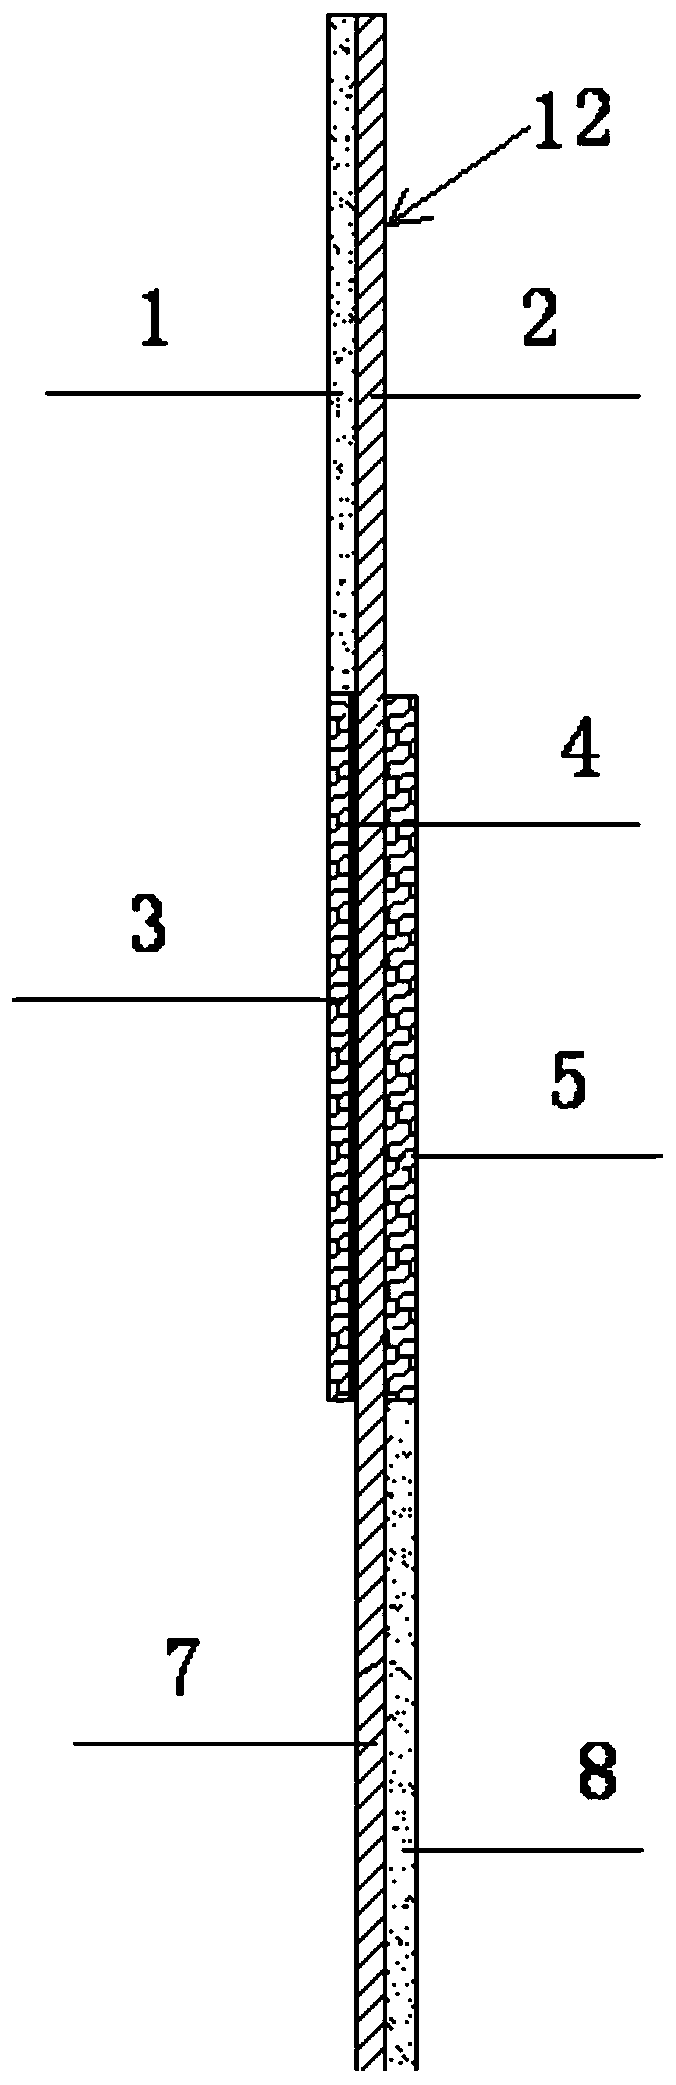 A strain gauge for measuring bond-slip between steel and concrete and its pasting method